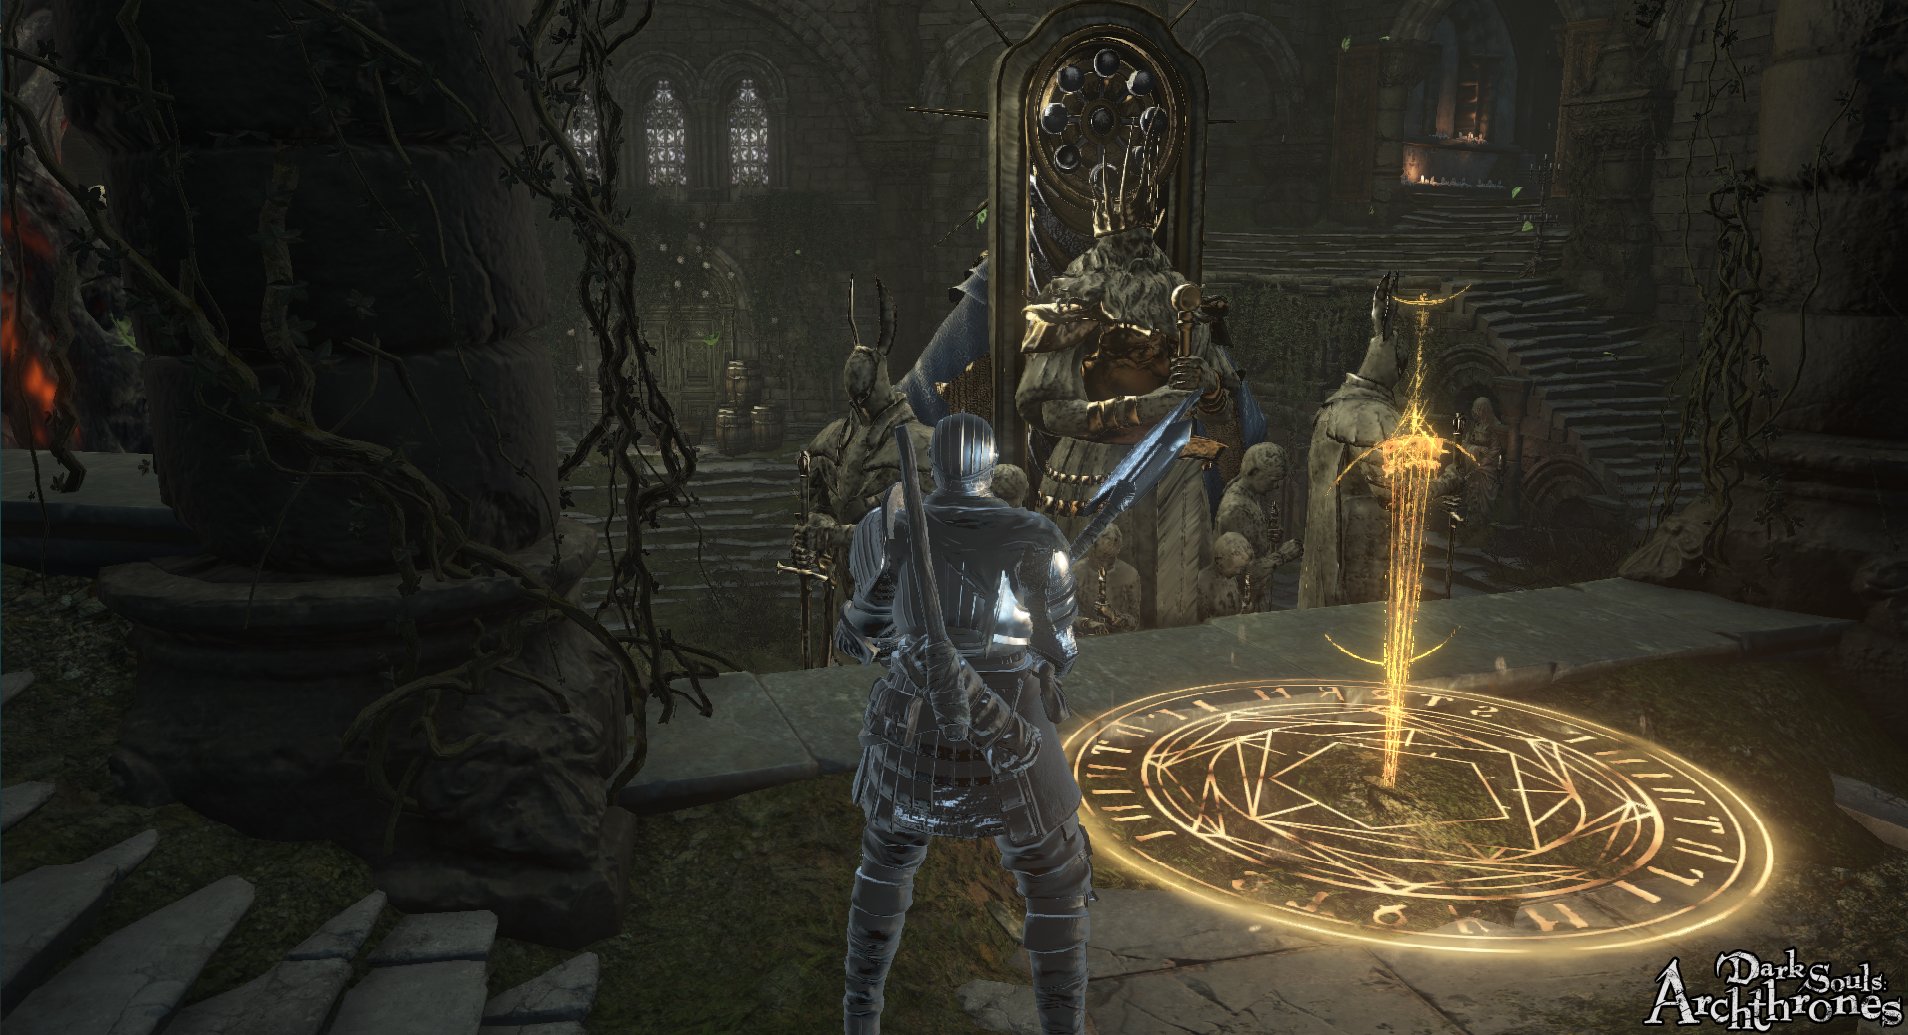 stress Lighed Menstruation Dark Souls: Archthrones on Twitter: "Here's your Elden Ring reference bro  #Archthrones #DarkSouls3 https://t.co/Fb98p69aT5" / Twitter